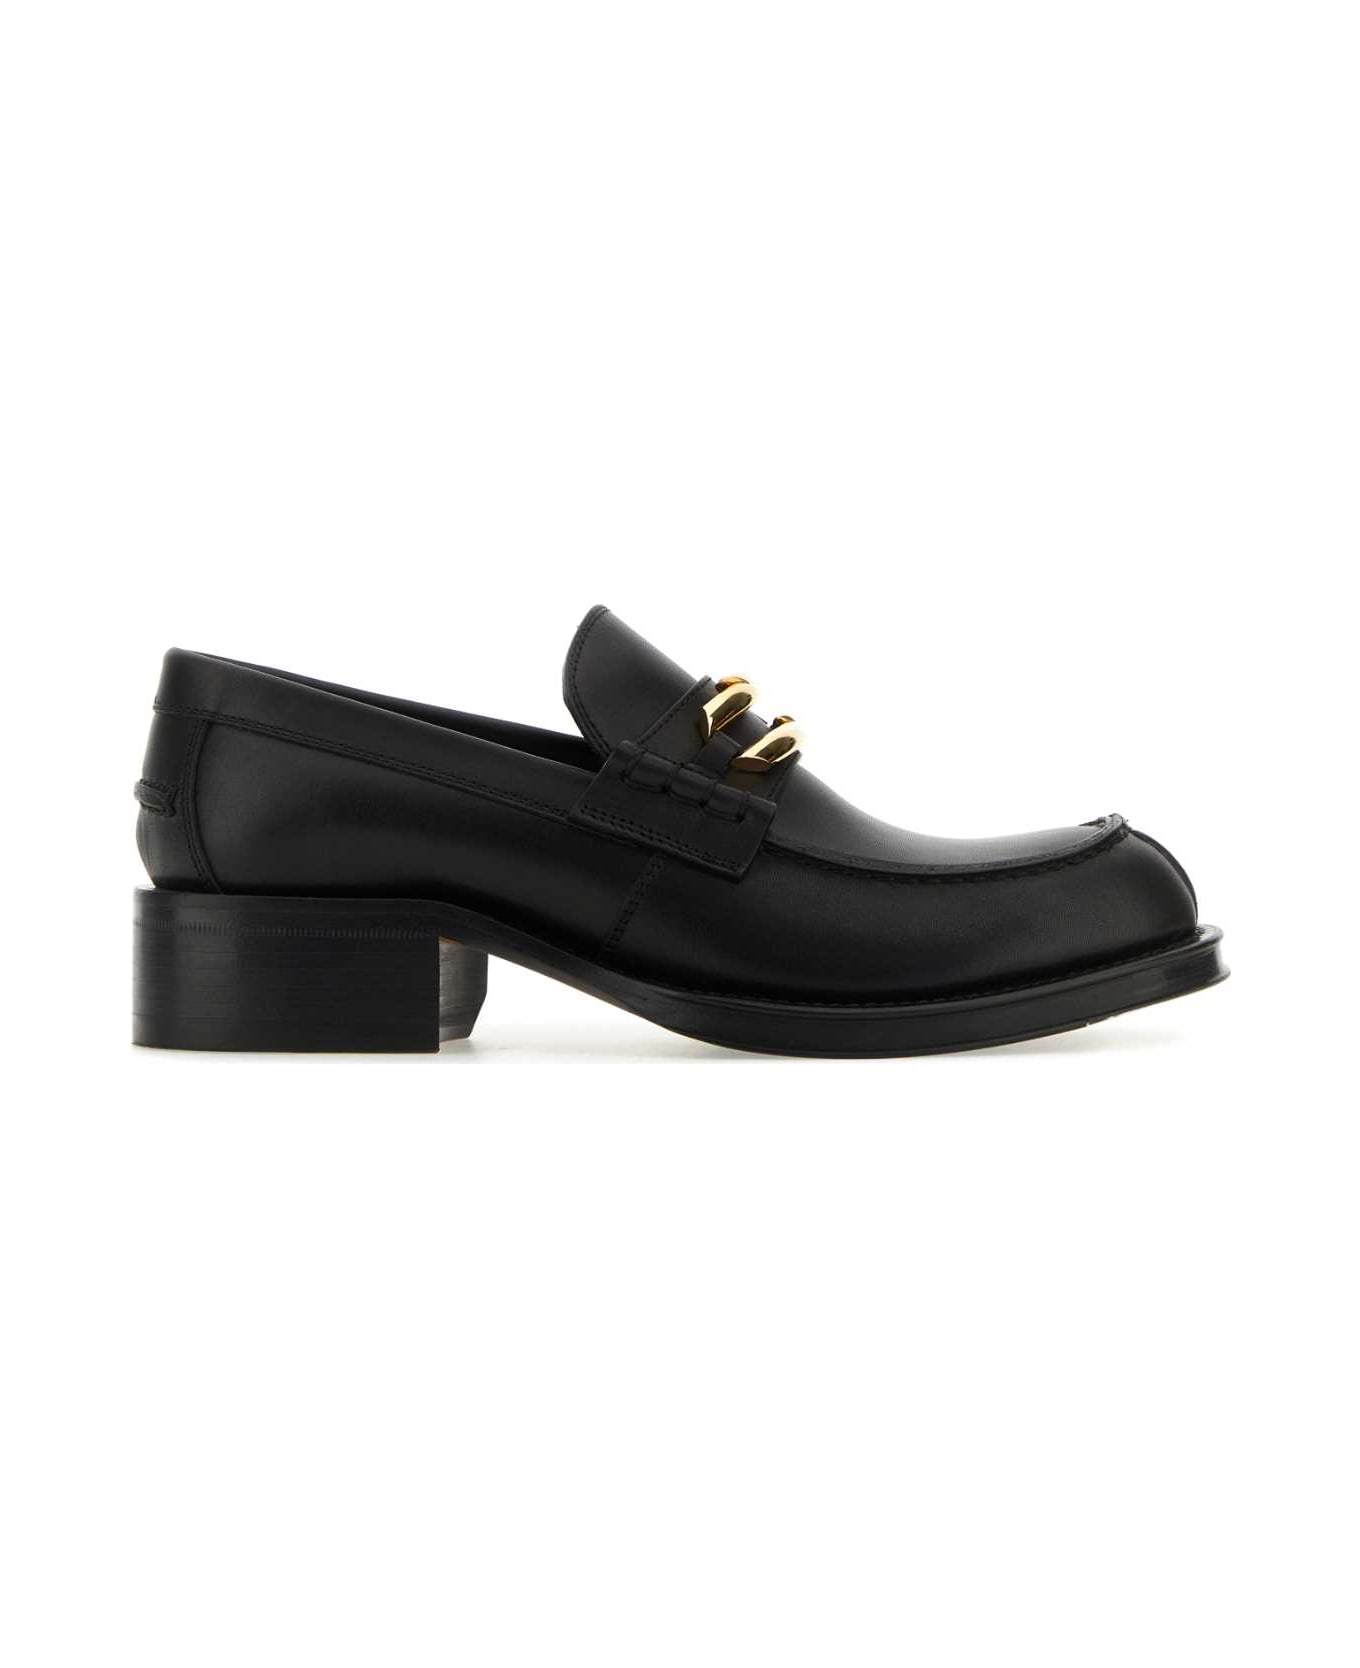 Lanvin Black Leather Medley Loafers - Black ハイヒール